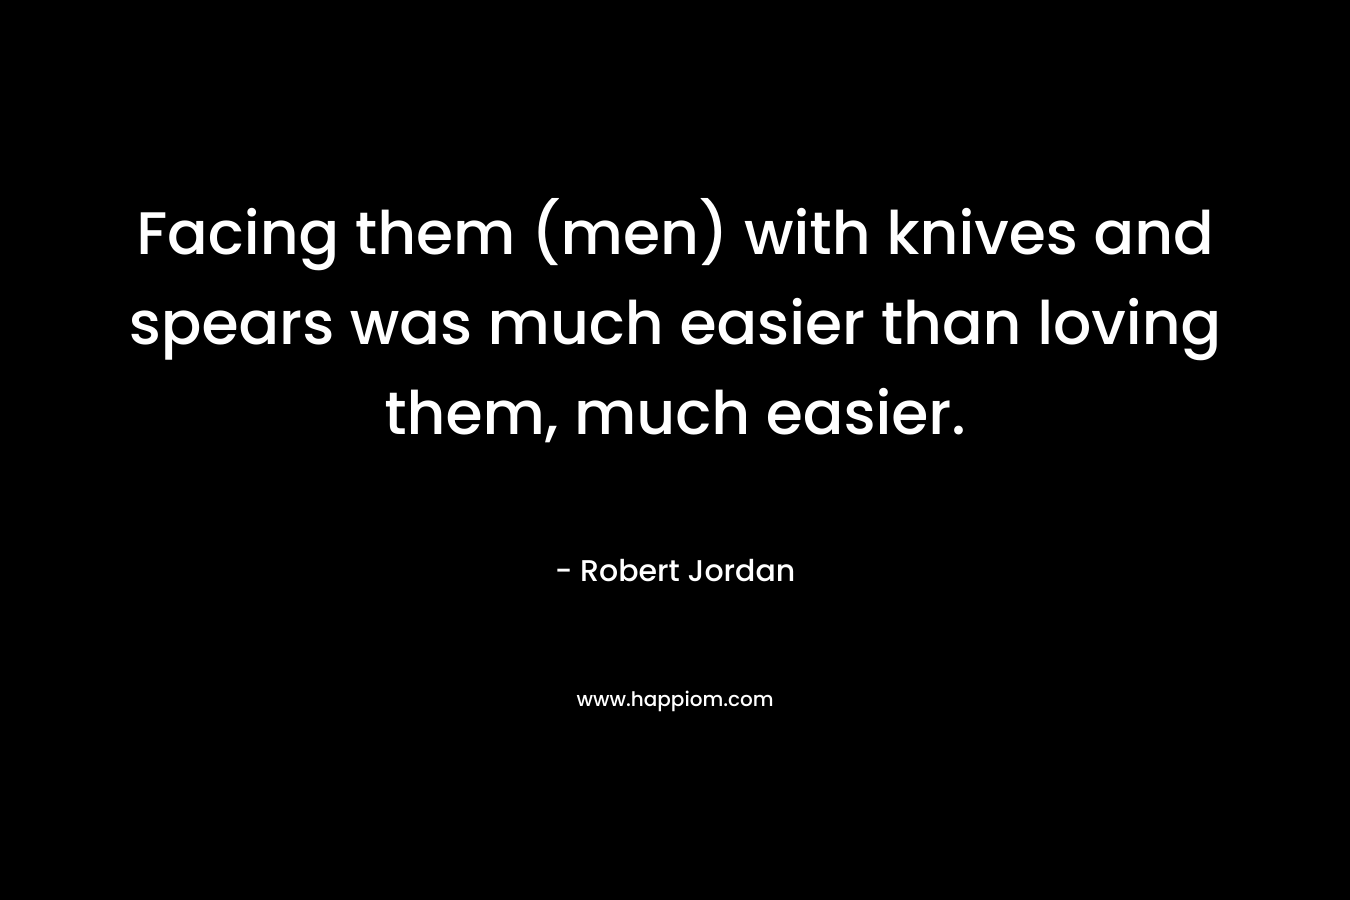 Facing them (men) with knives and spears was much easier than loving them, much easier.